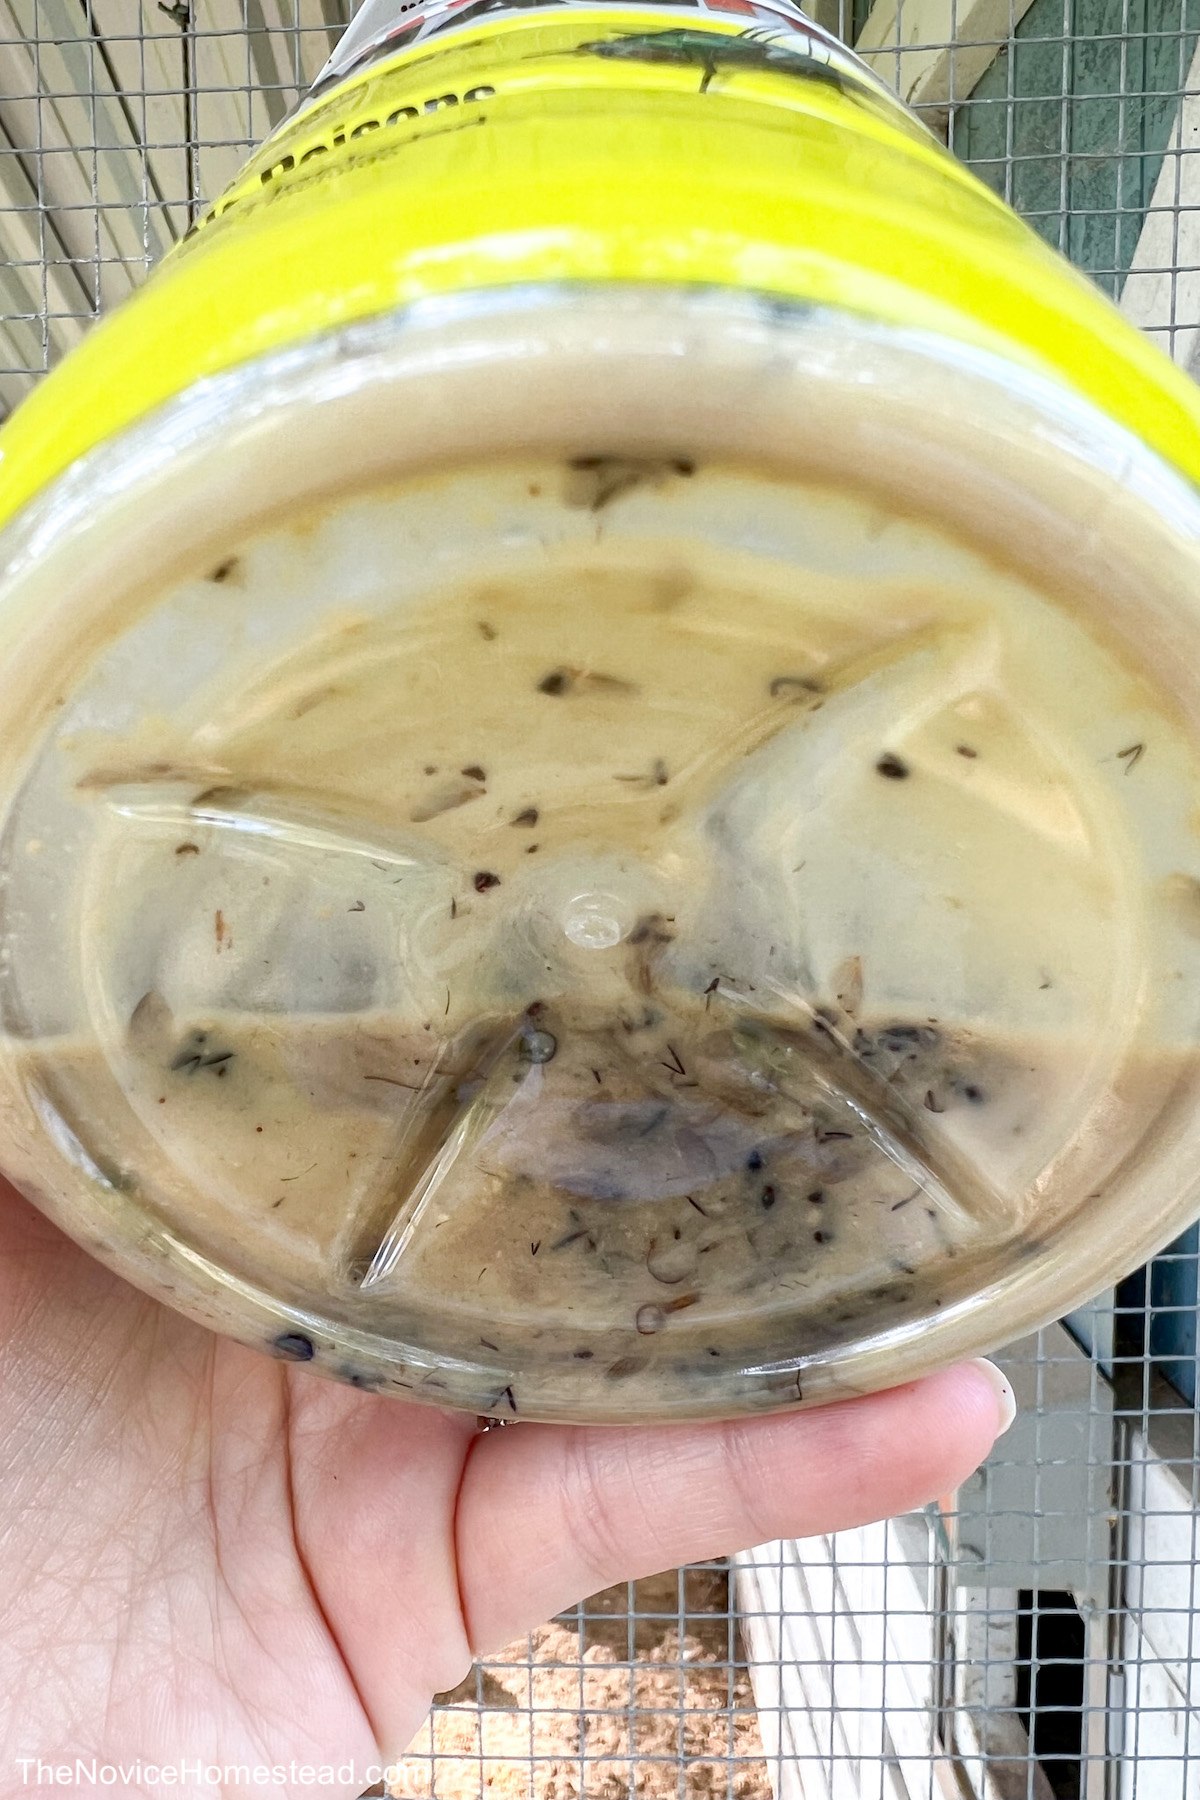 holding up the bottom of a fly trap showing all the bugs it caught